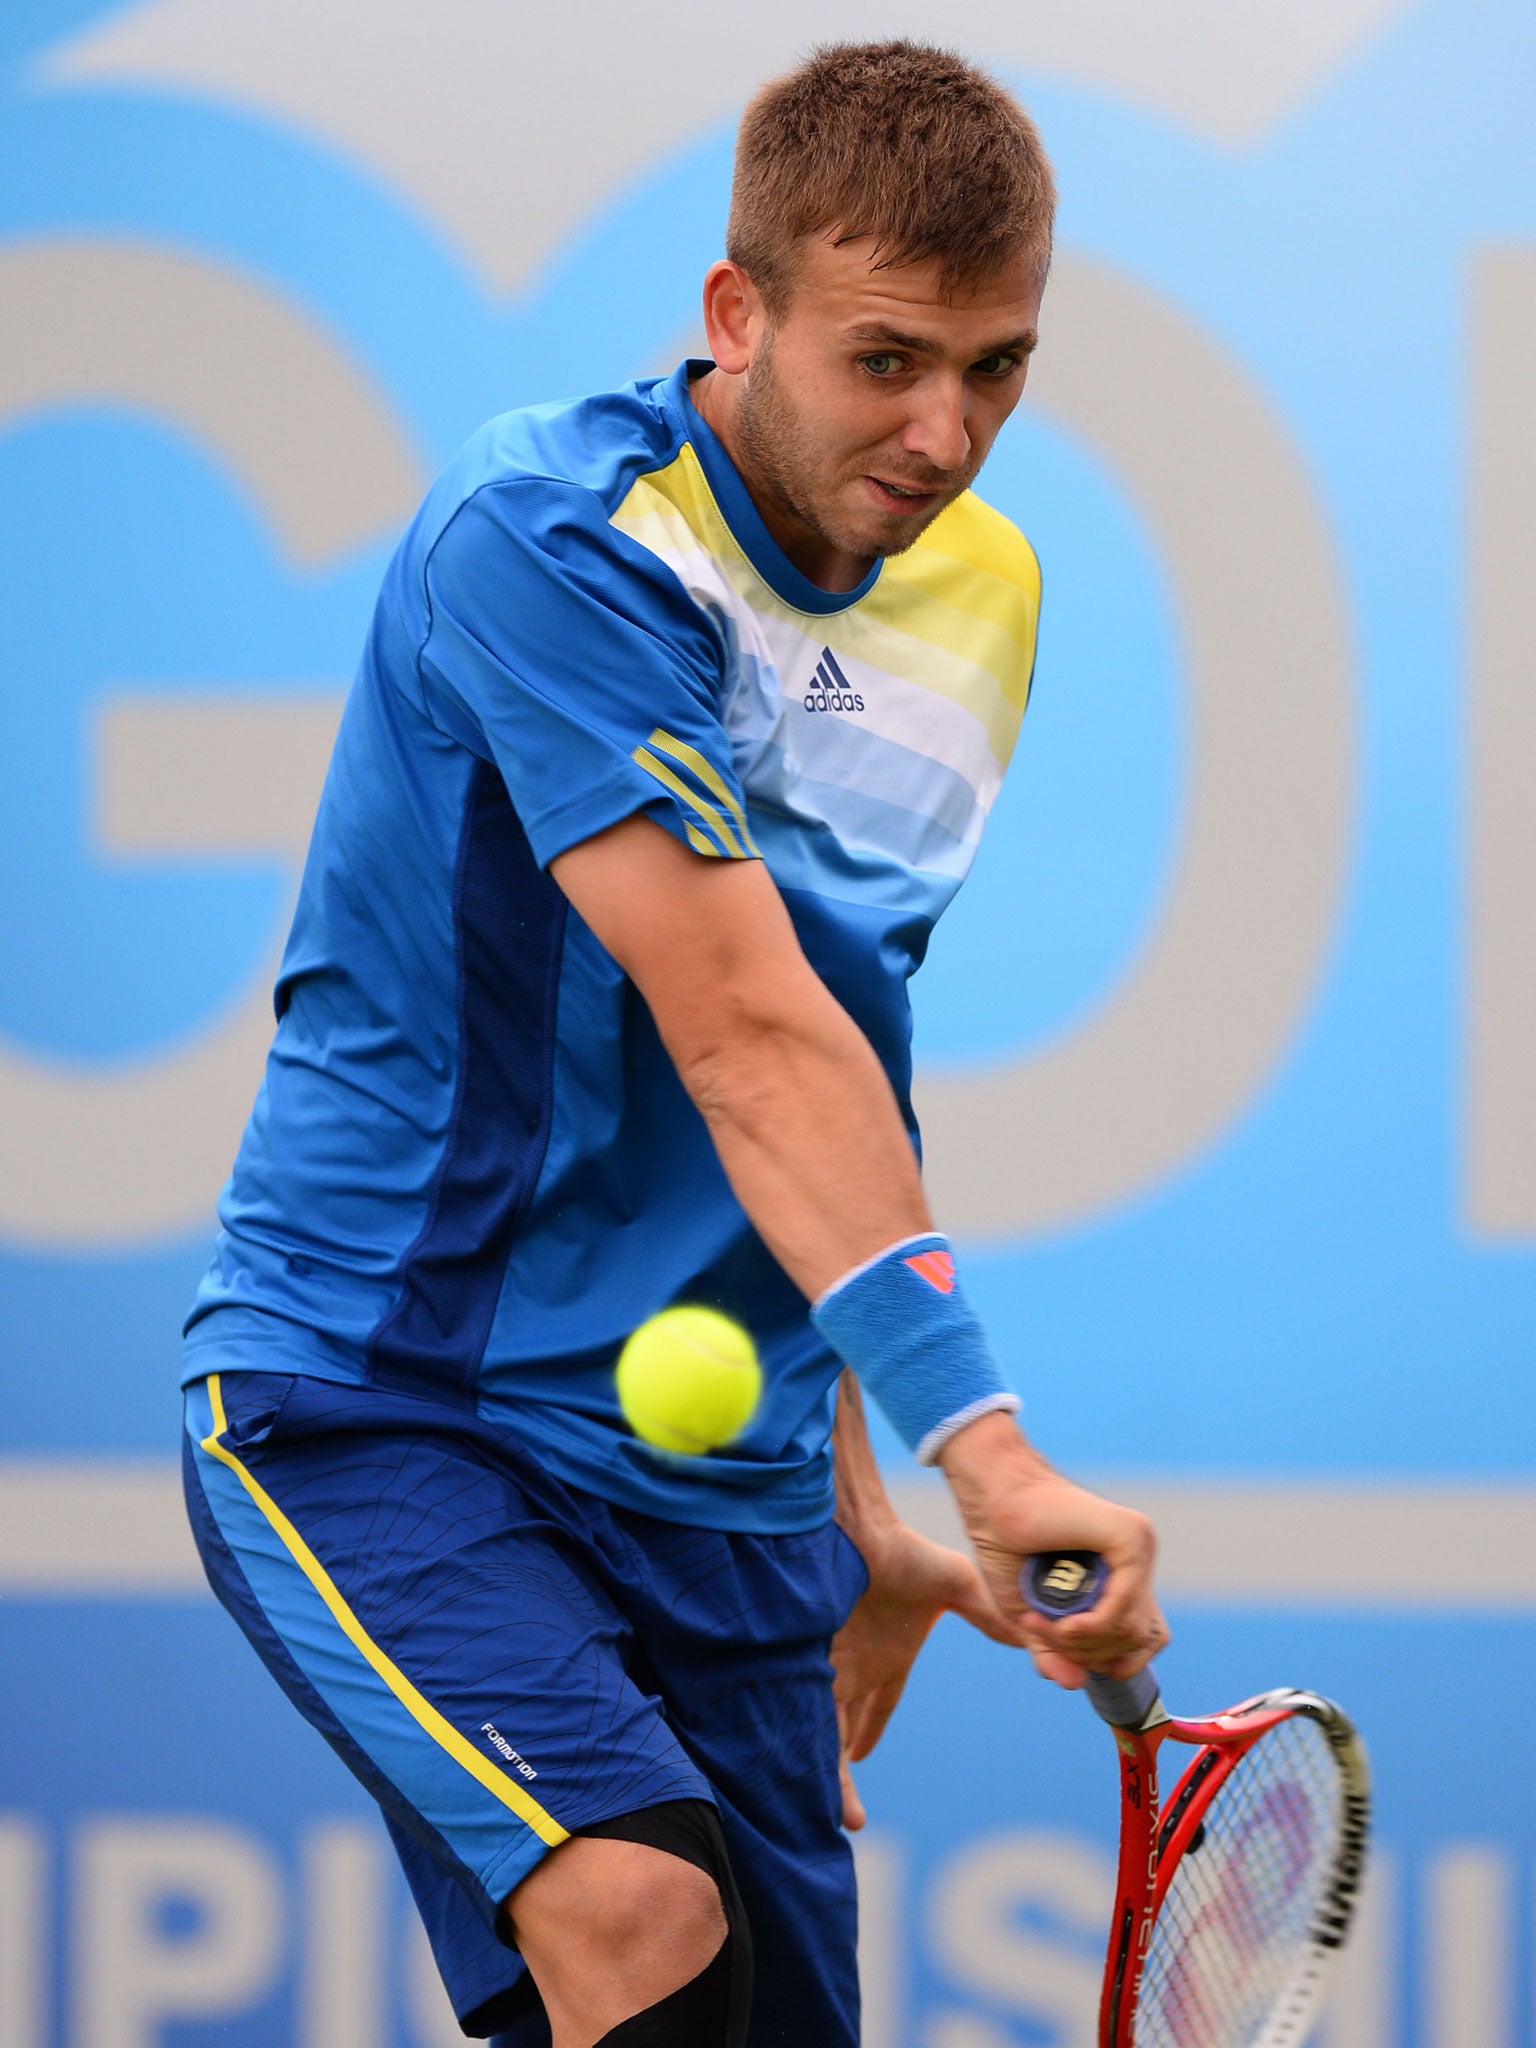 Dan Evans is in fine form as he aims to qualify for Wimbledon